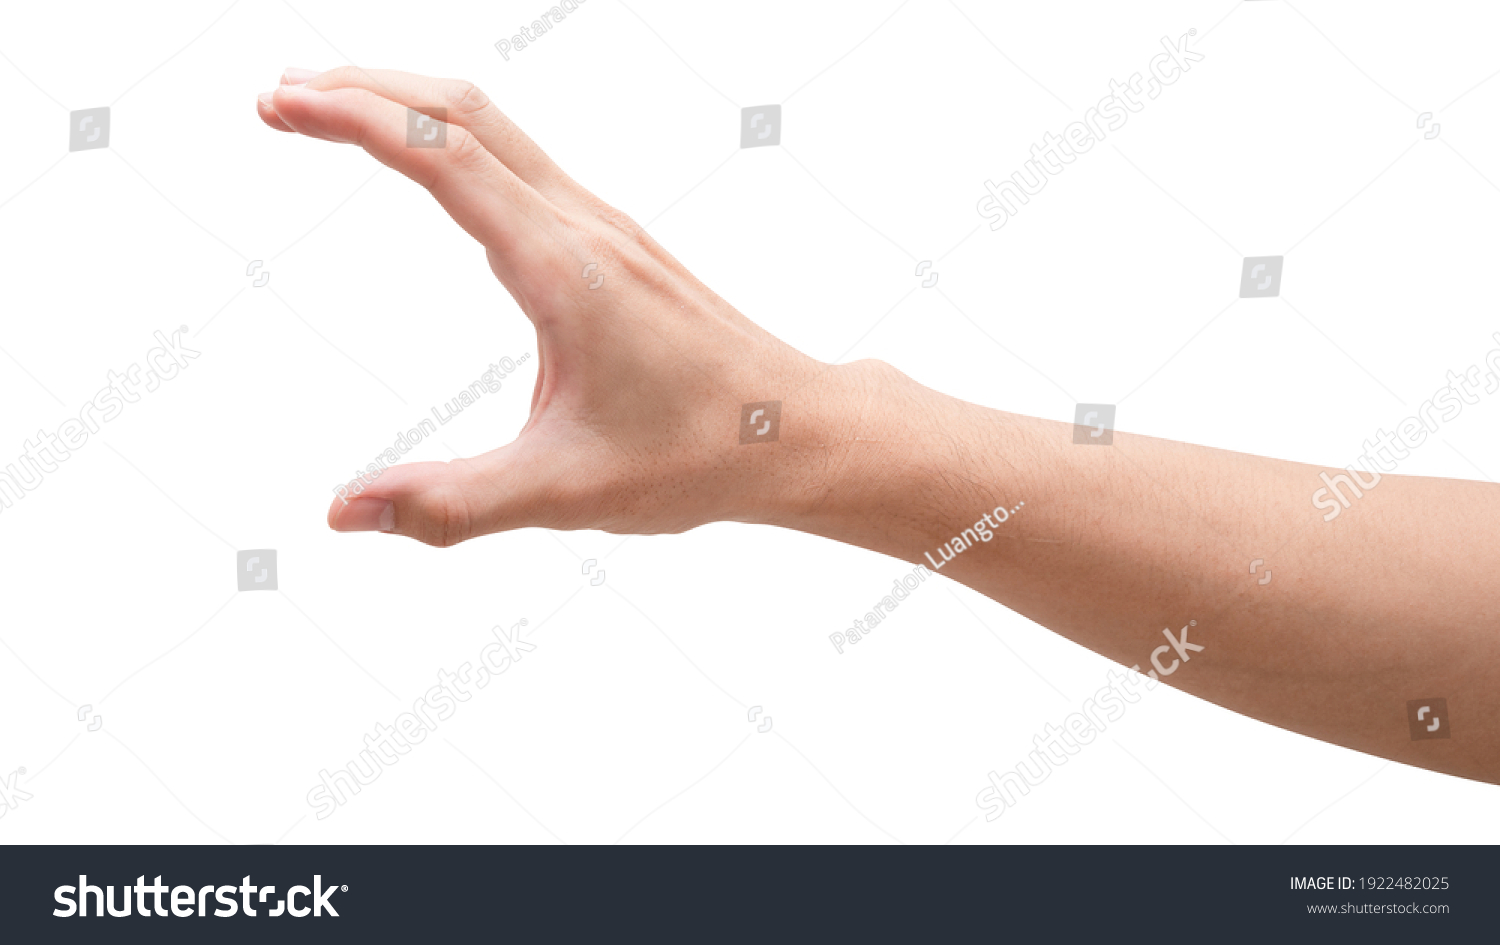 Close up male hand holding something like a bottle or can isolated on white background with clipping path. #1922482025